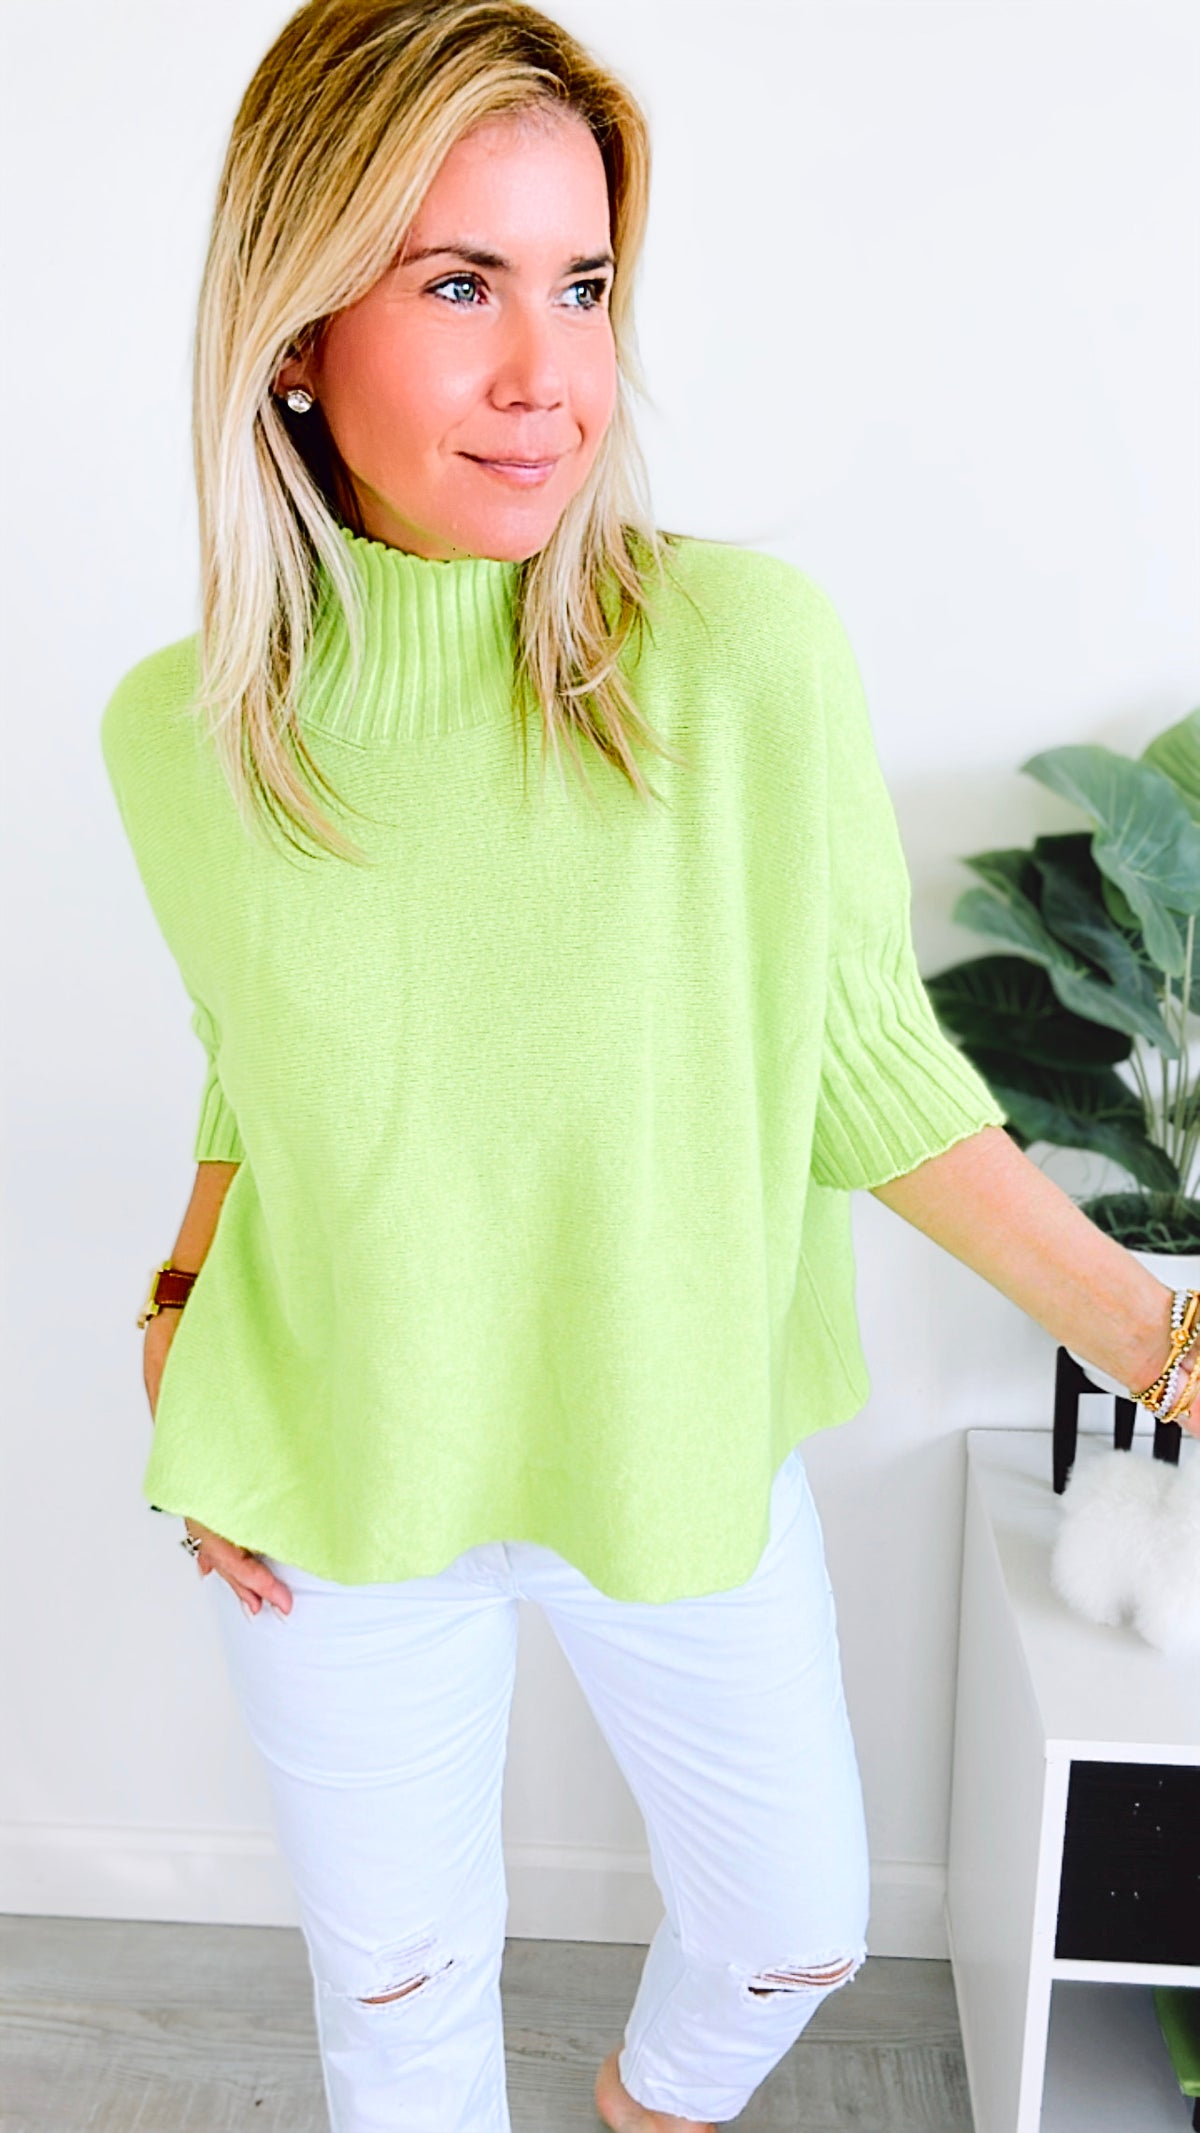 Break Free Italian Sweater Top - Kiwi-110 Short Sleeve Tops-Yolly-Coastal Bloom Boutique, find the trendiest versions of the popular styles and looks Located in Indialantic, FL